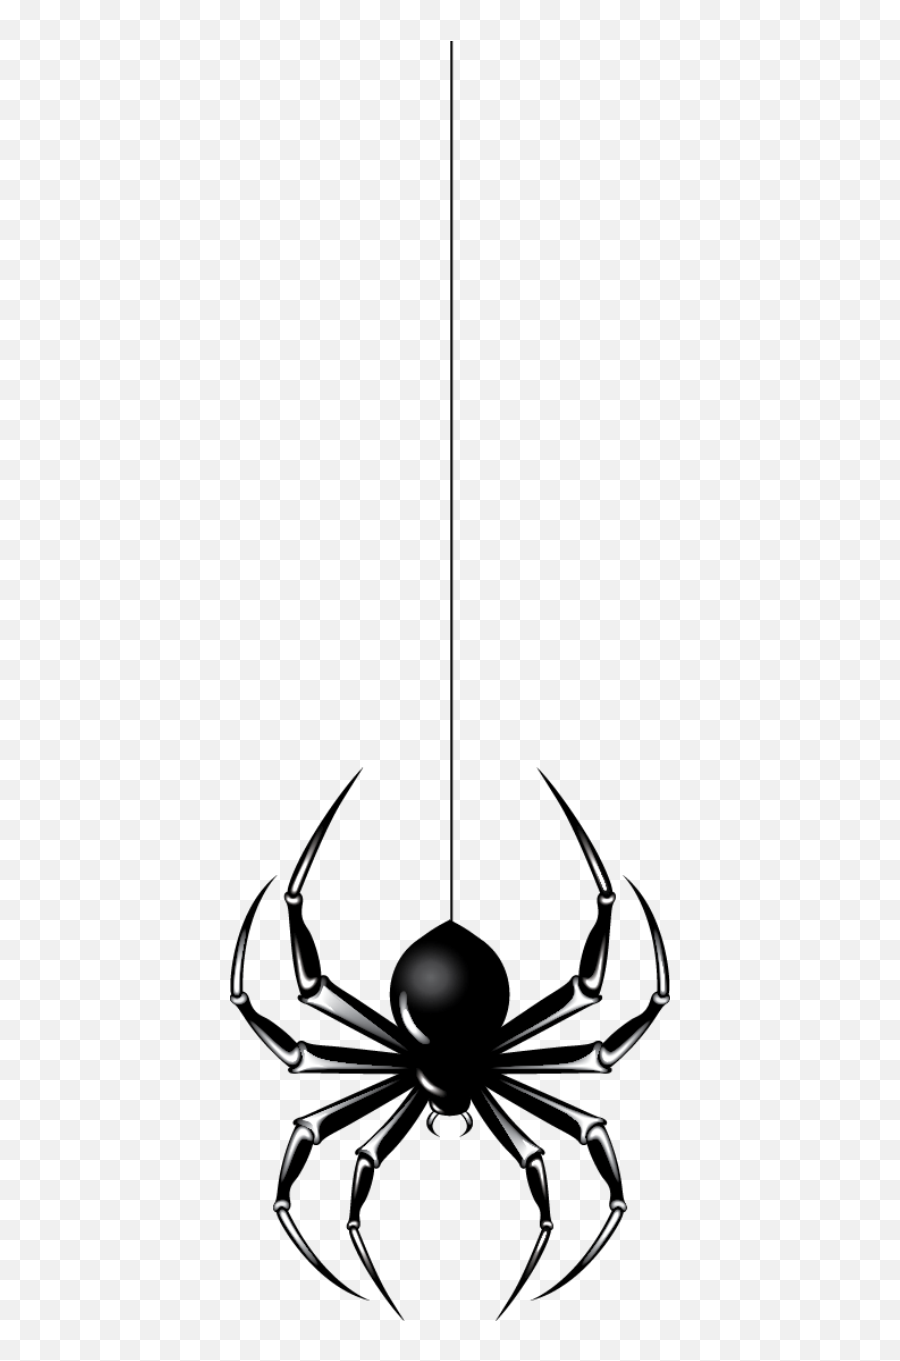 Download Free Hanging Spider Icon Favicon Freepngimg Png